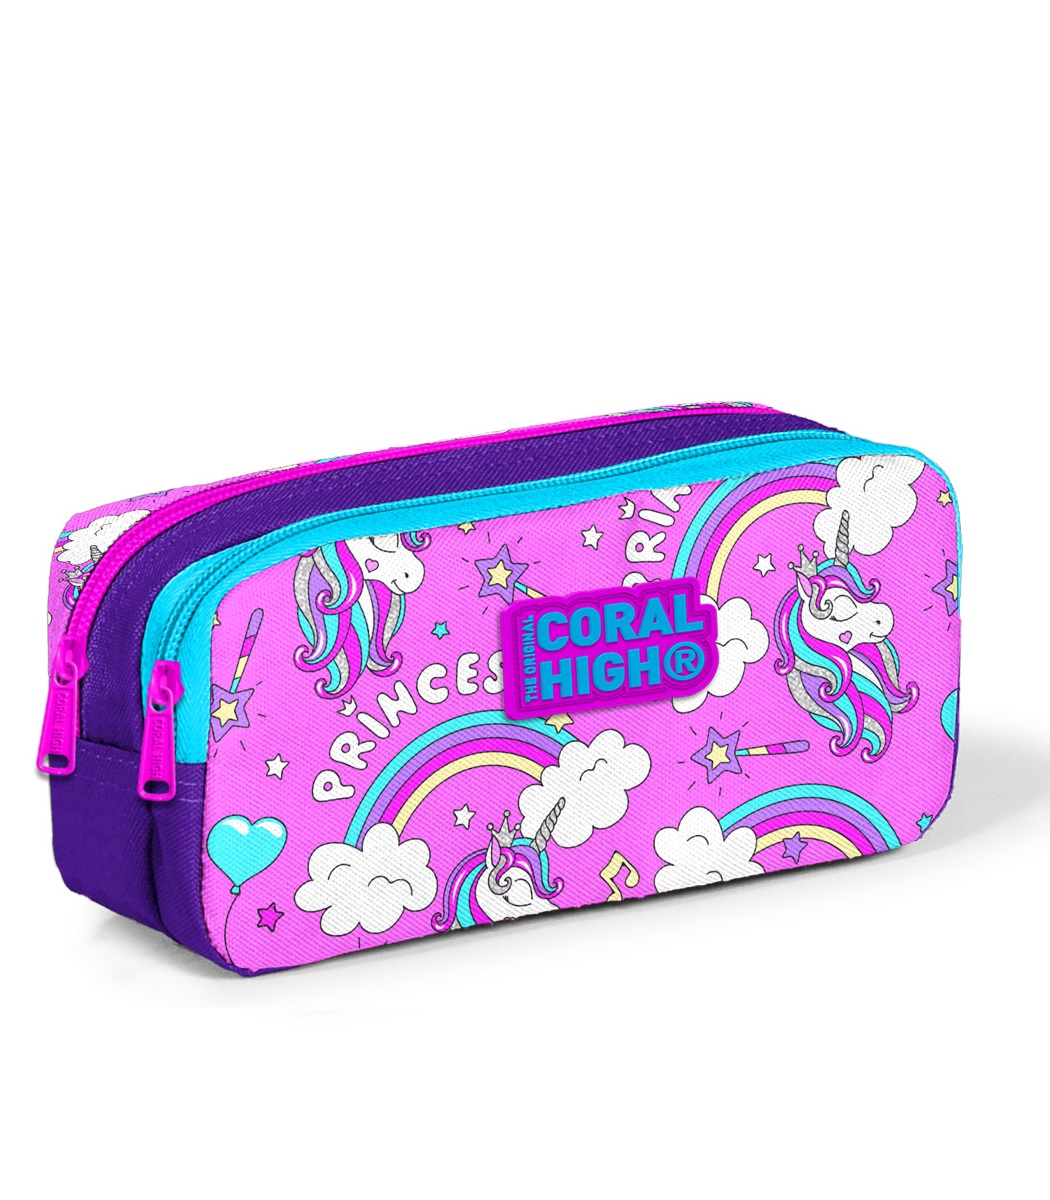 Coral High Kids Two Compartment Pencil case - Purple Light Pink Unicorn Patterned